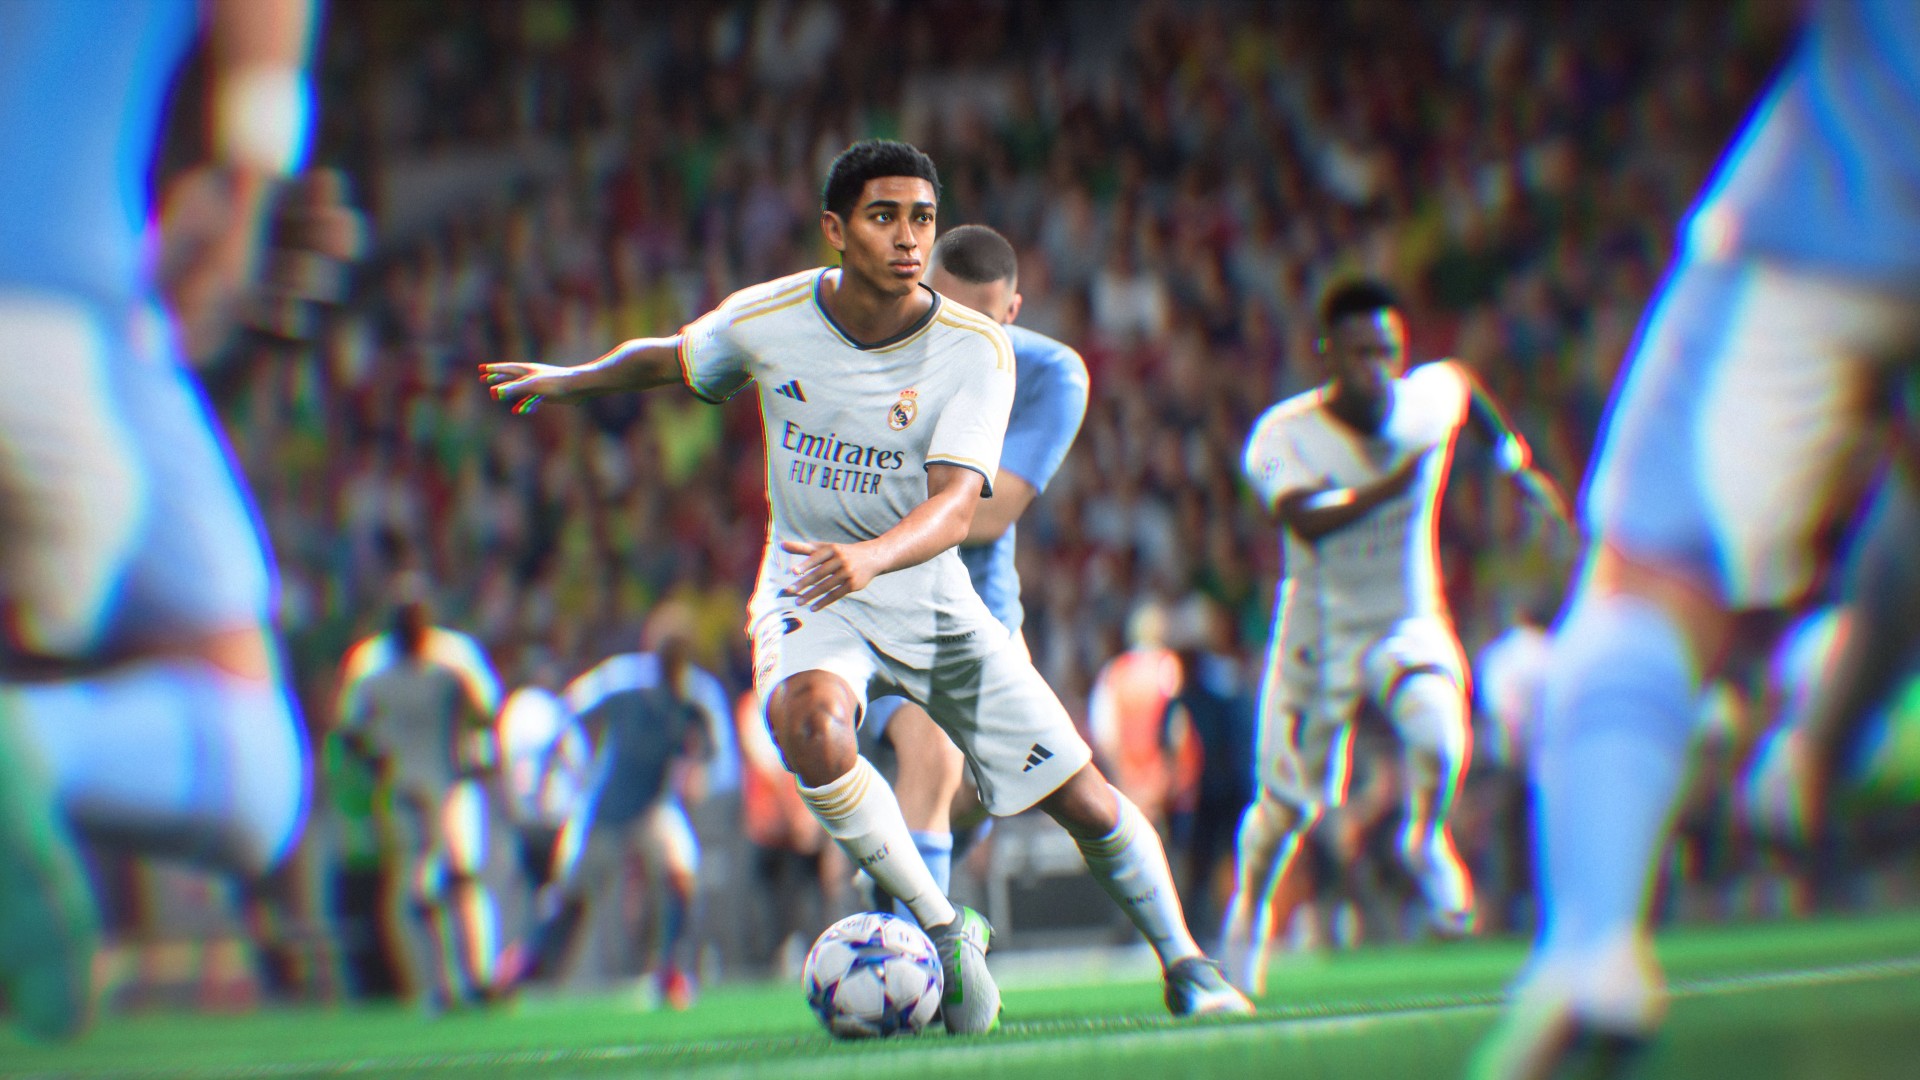 EA Sports FC 24 vs FIFA 23: What are the new features?